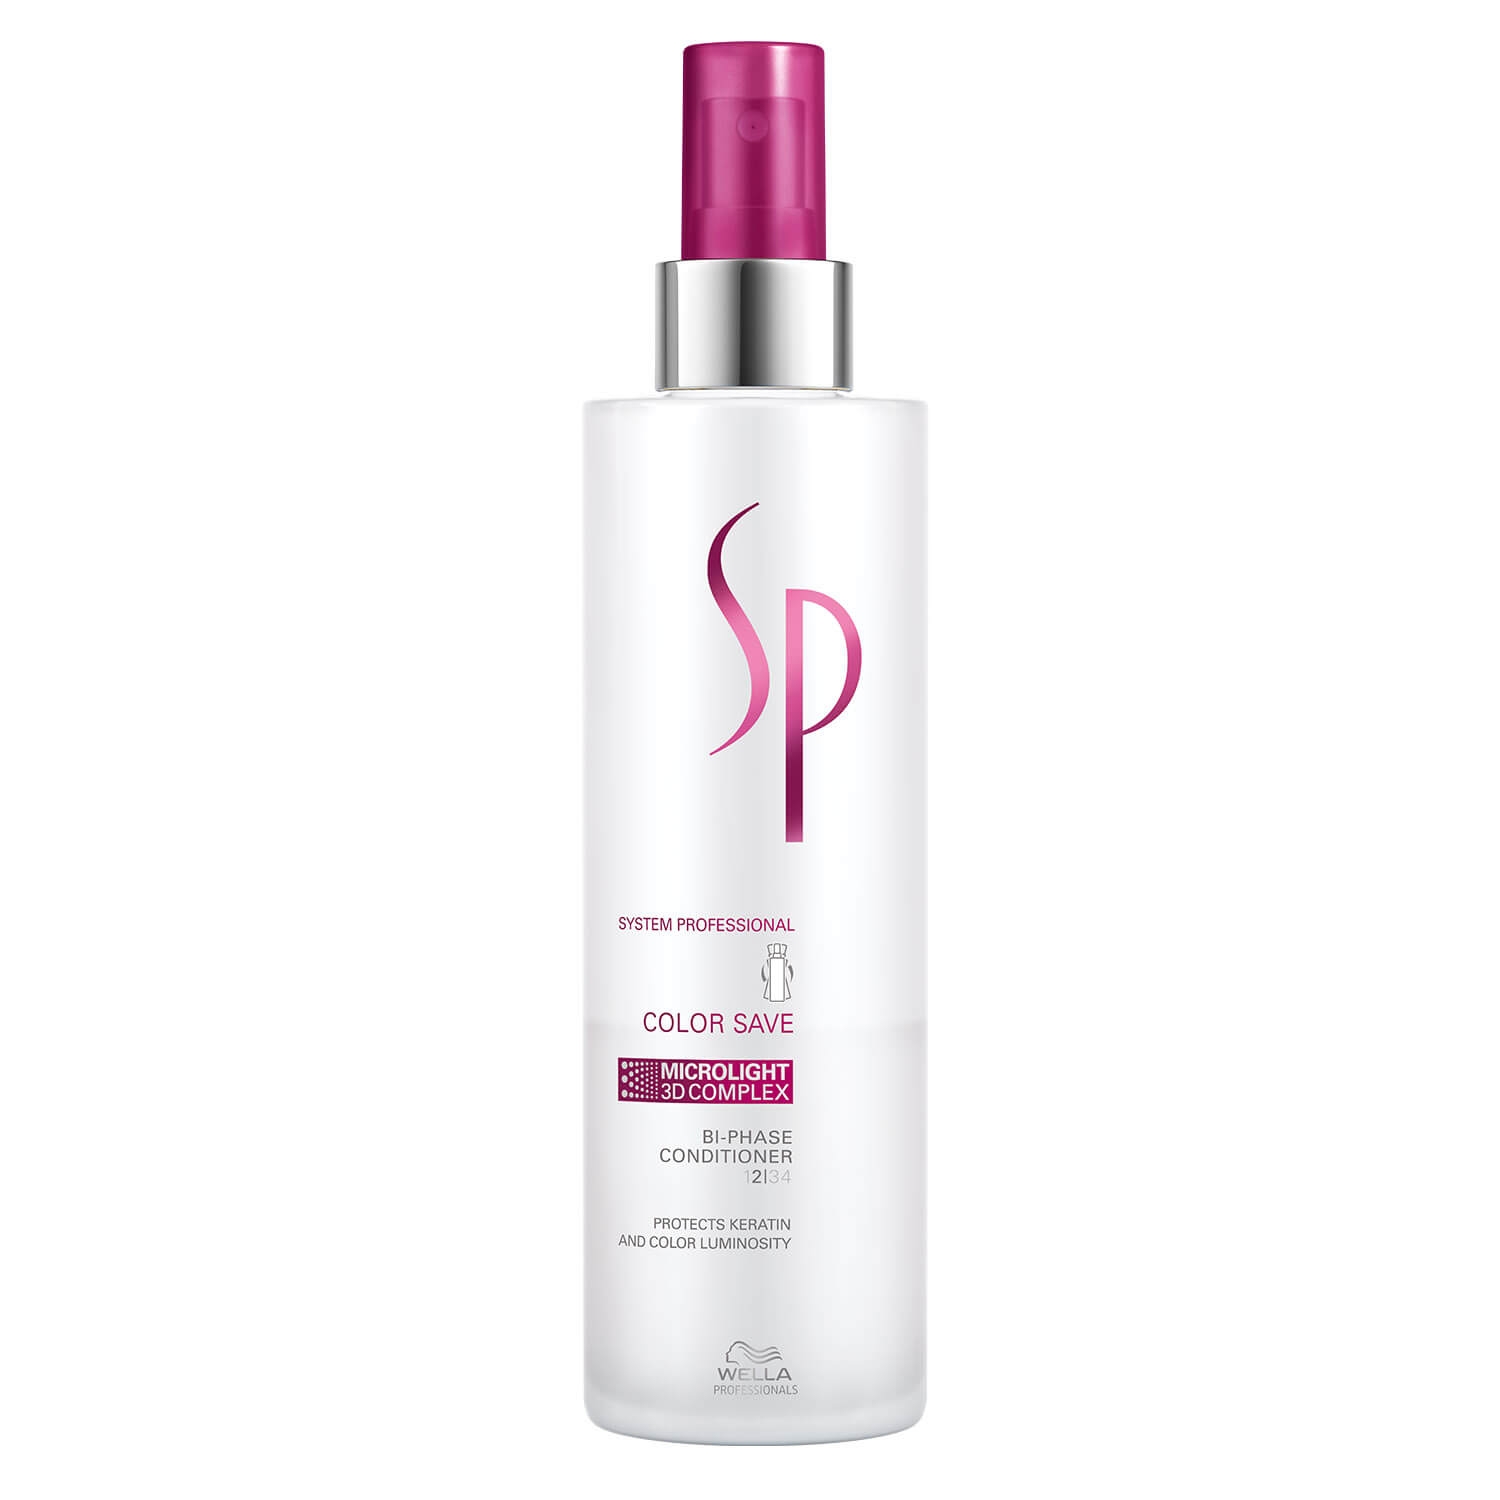 Product image from SP Color Save - Bi-Phase Conditioner